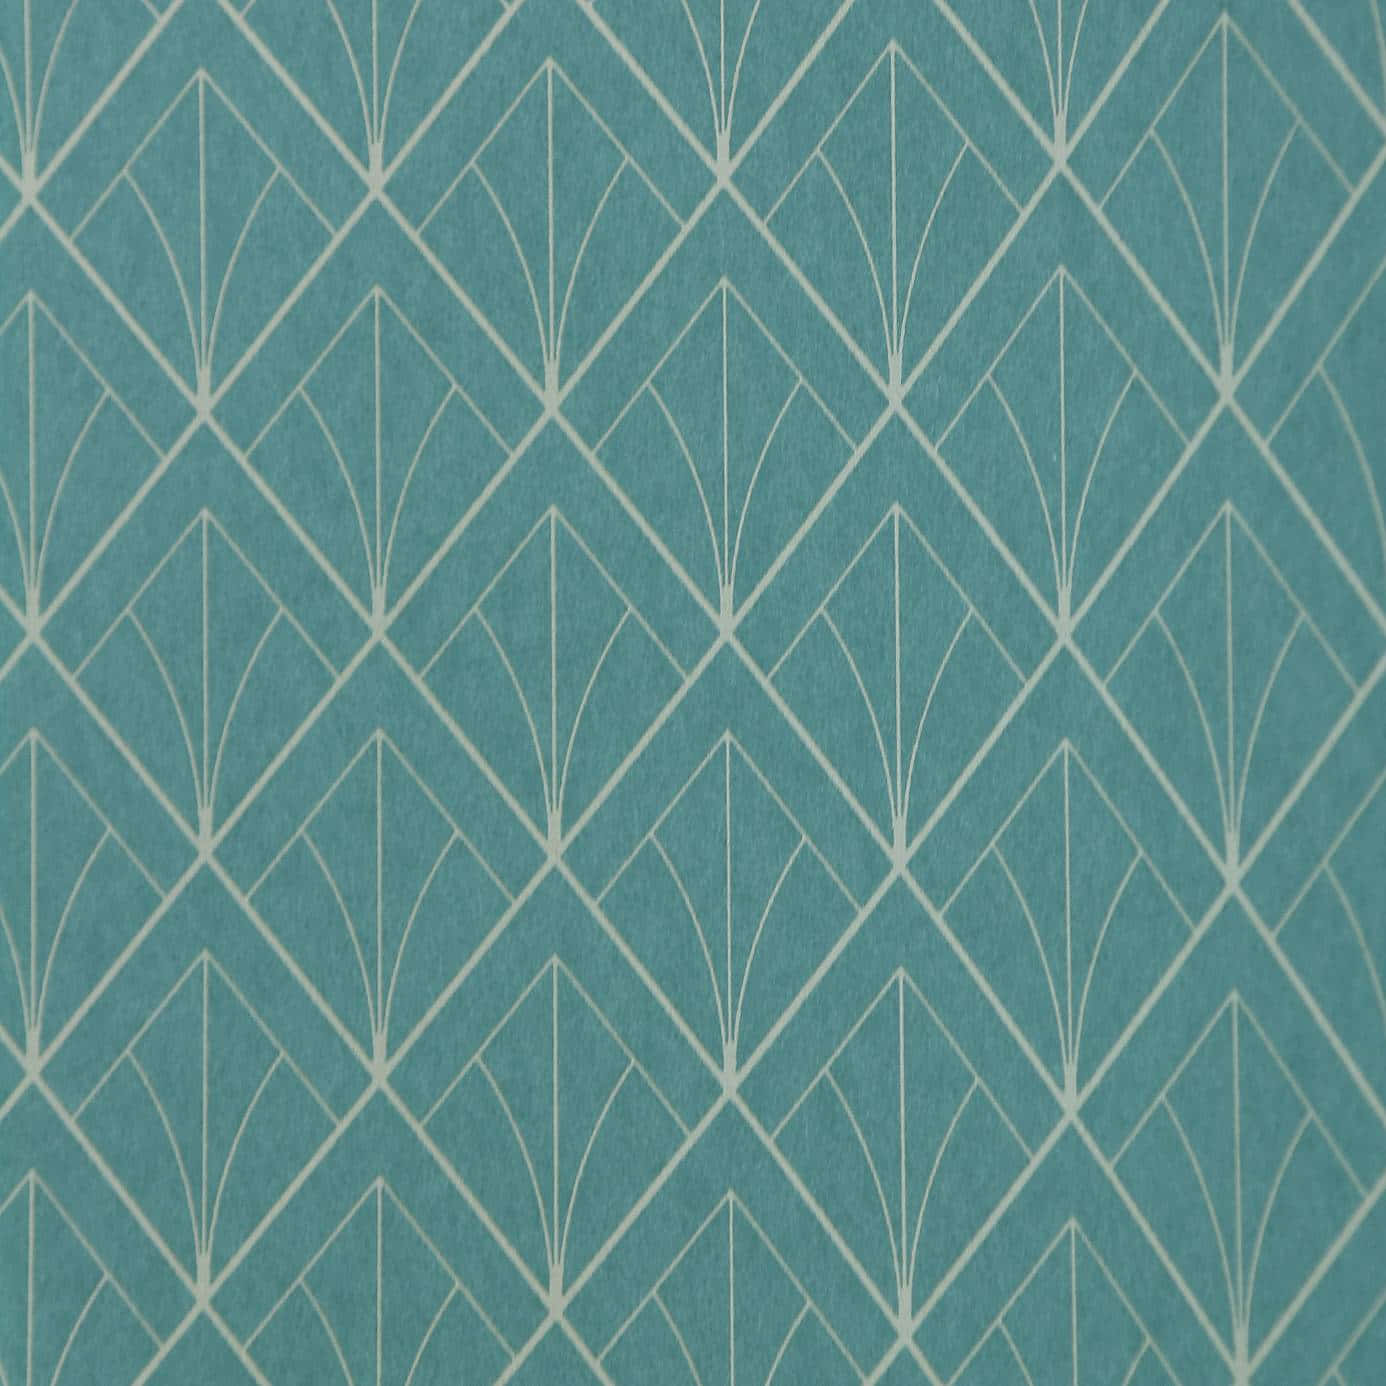 A Teal And White Wallpaper With Geometric Designs Wallpaper